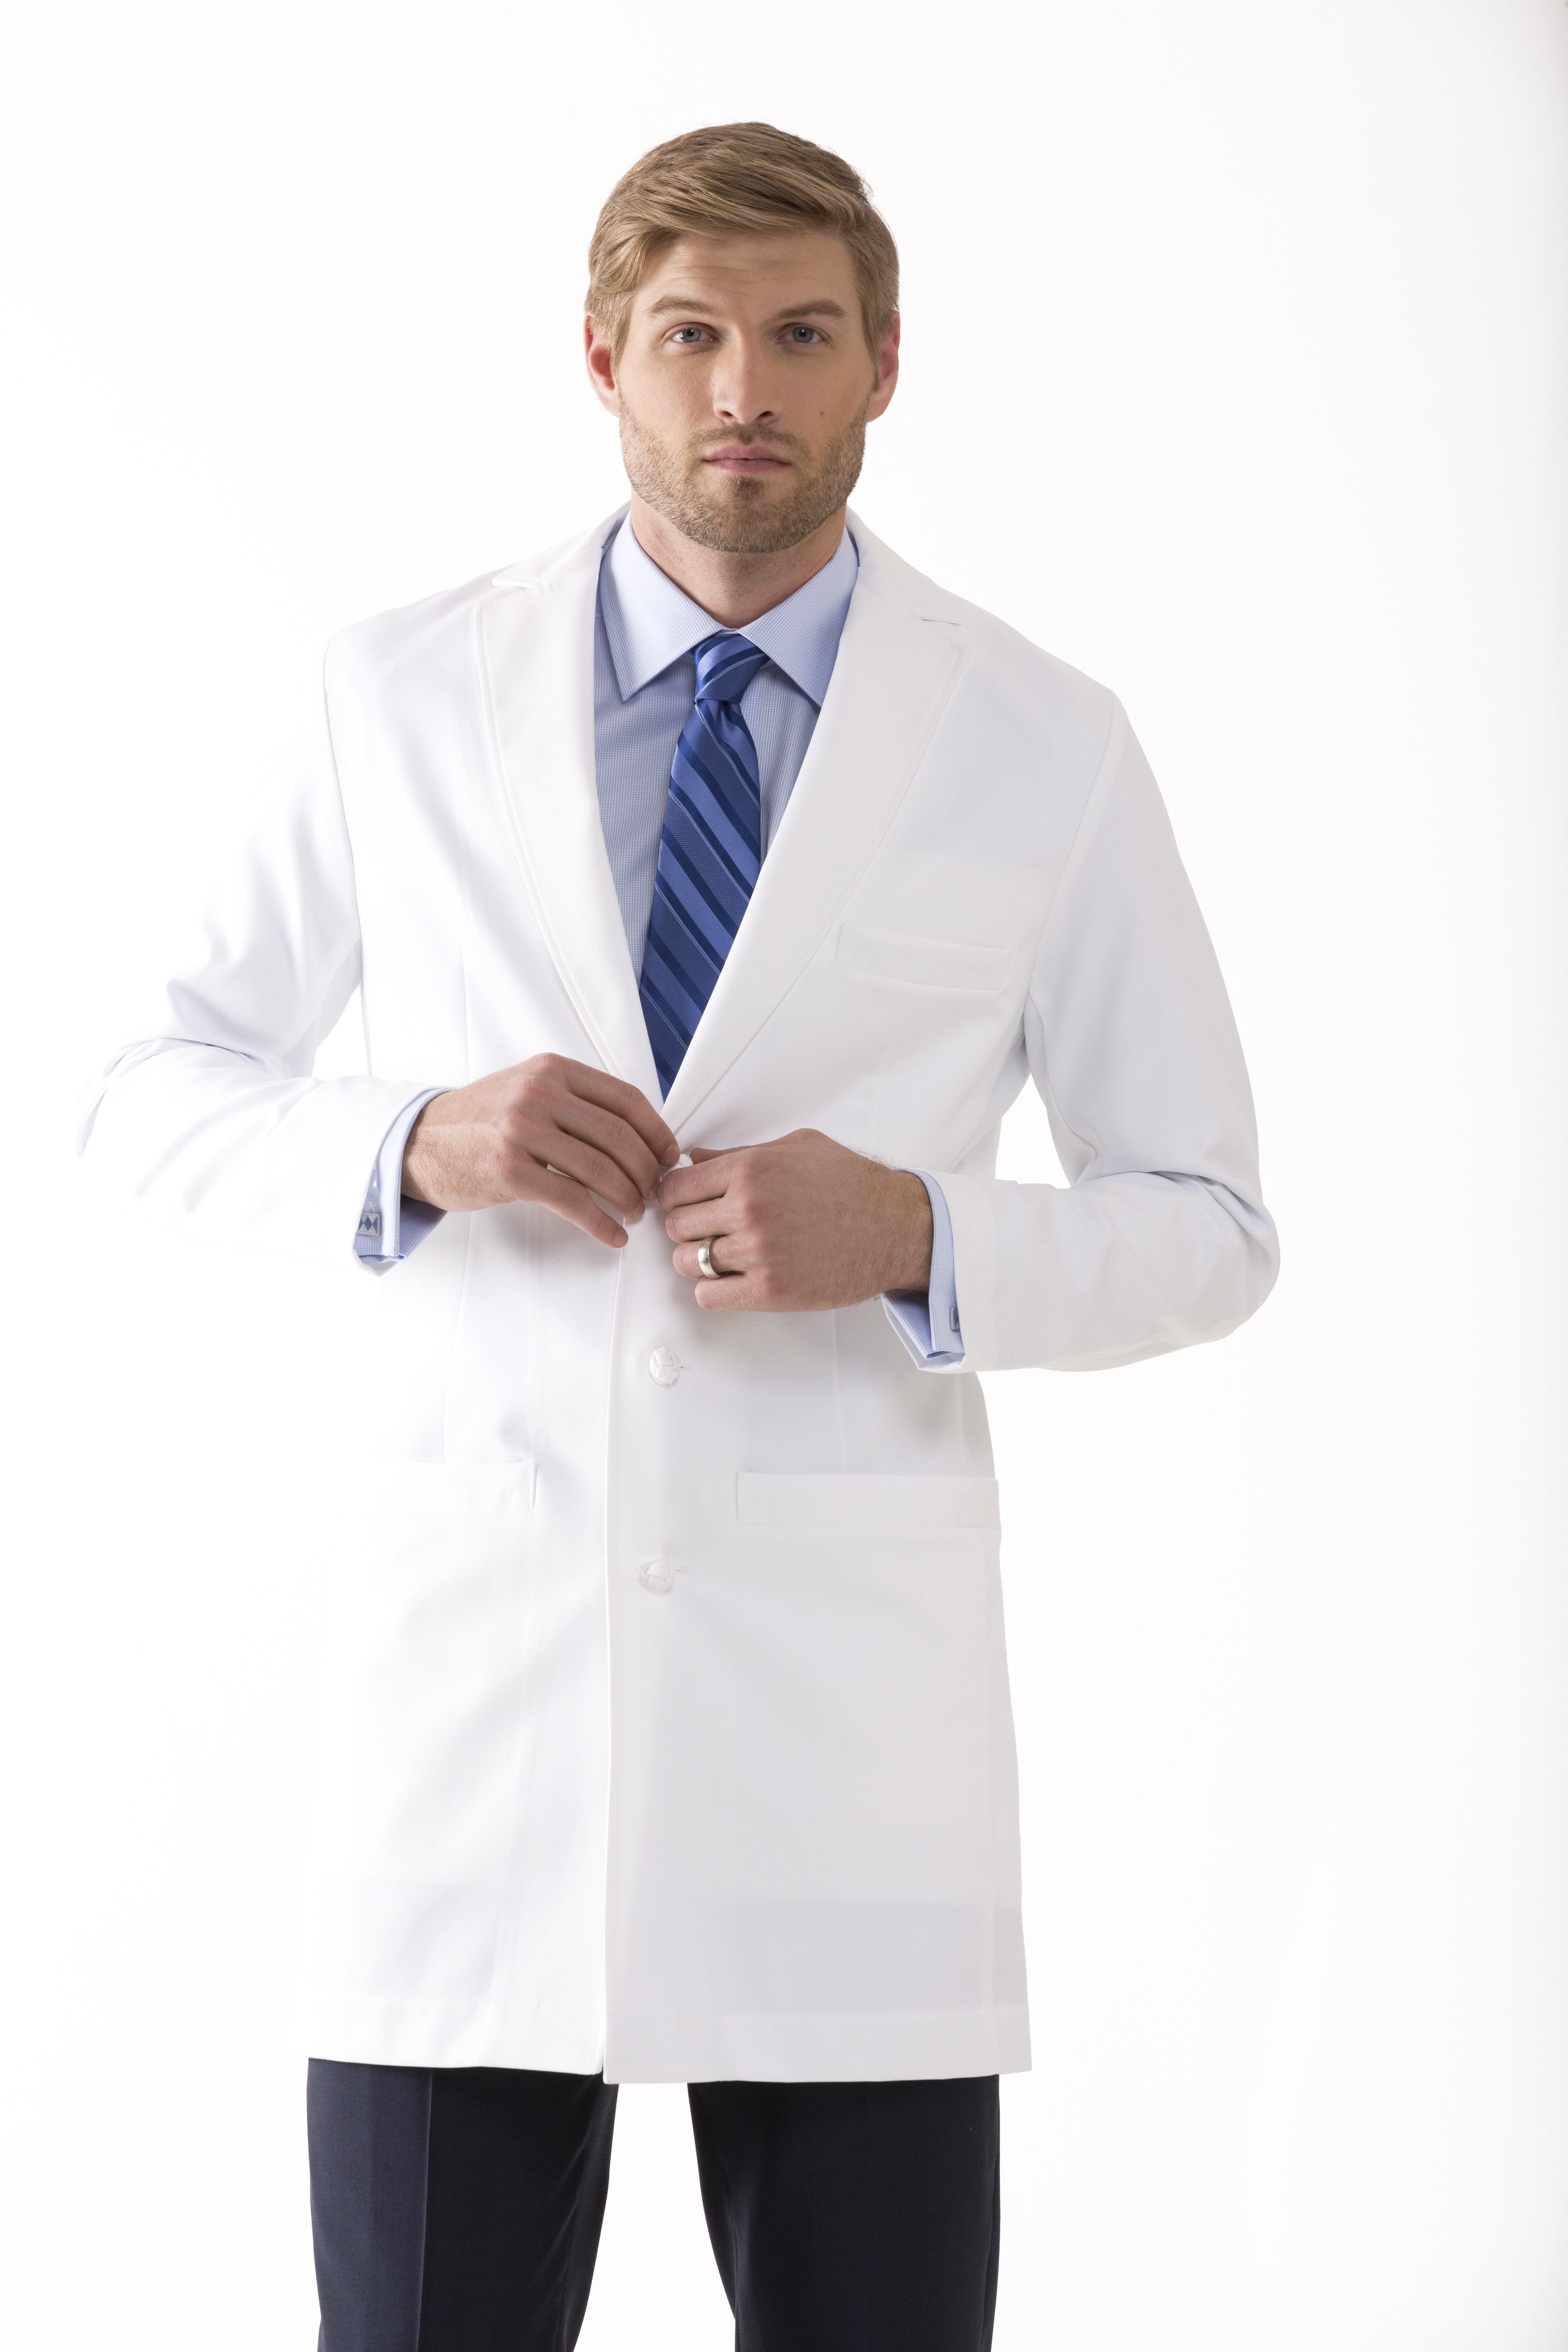 007 A Leading Lab Coat For A Leading Physician Medelita